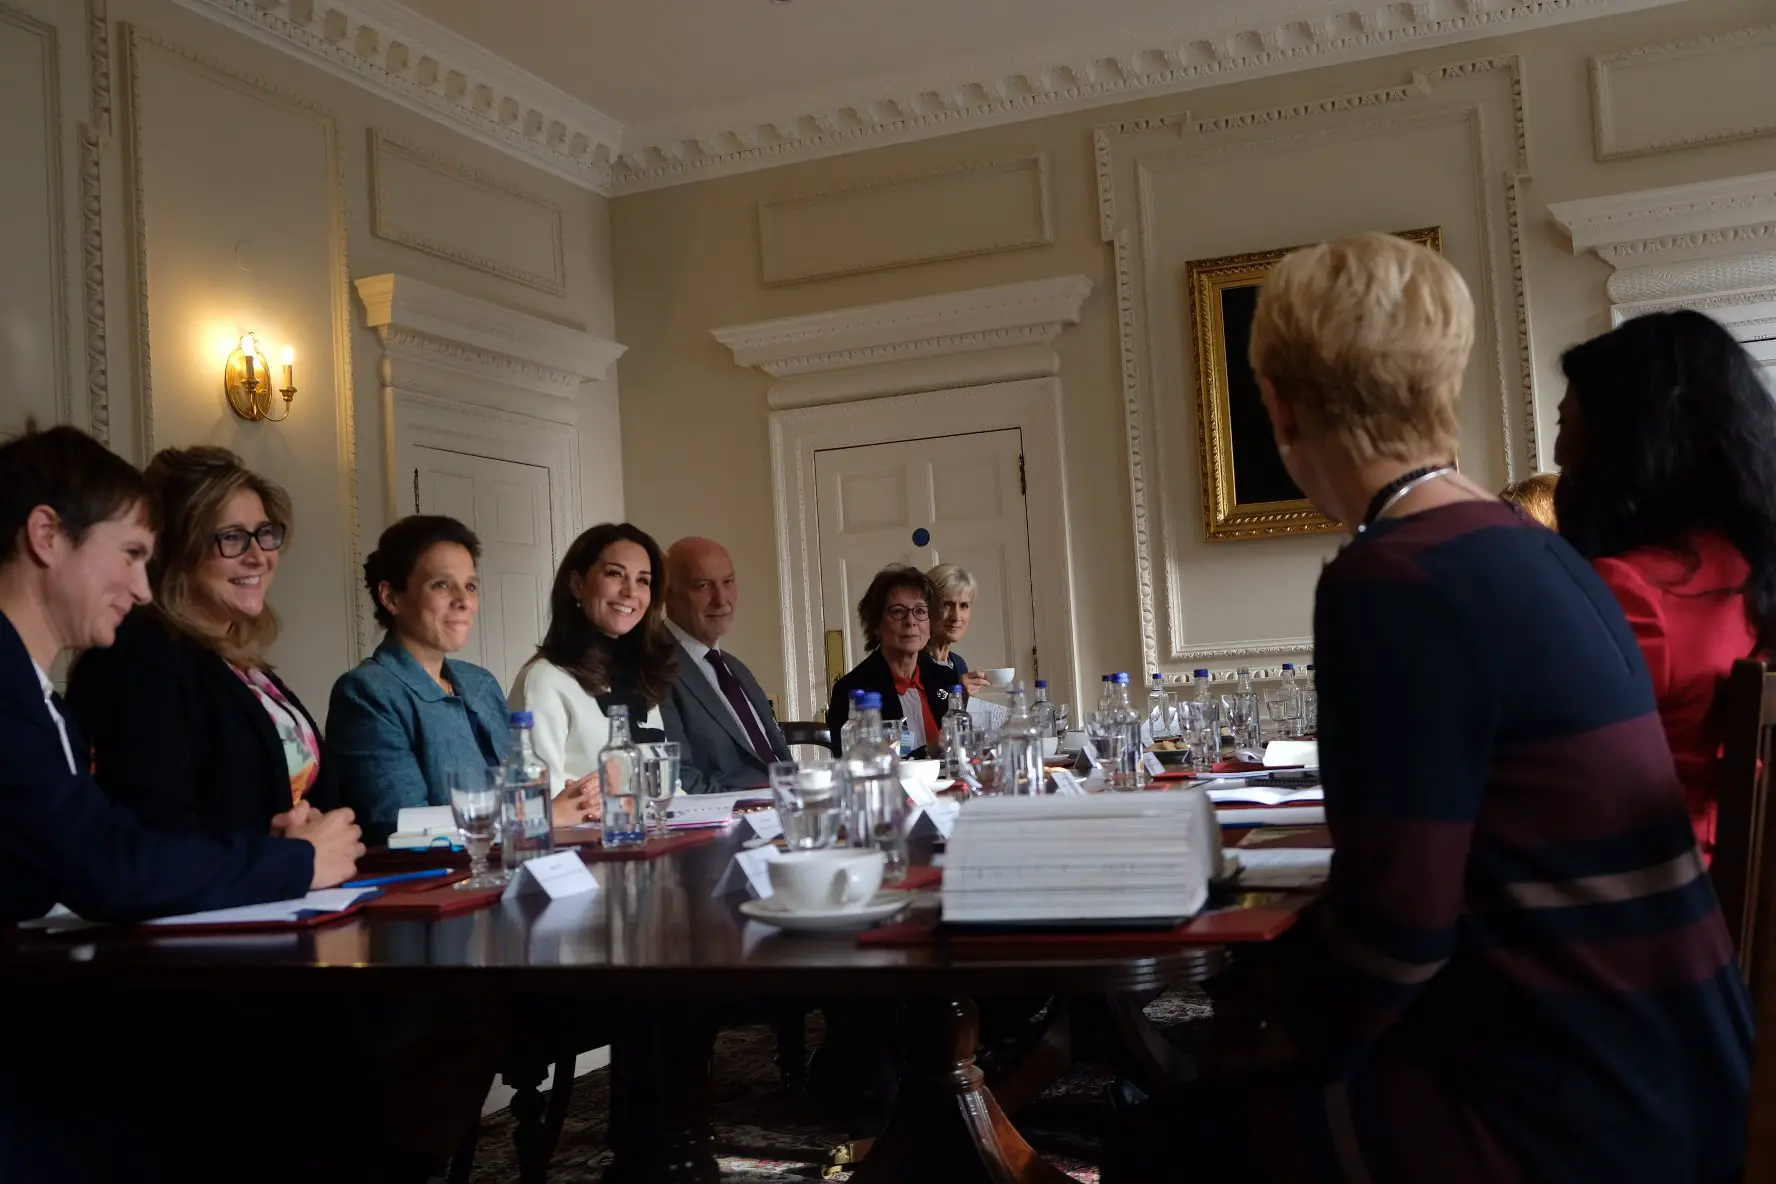 The Duchess of Cambridge set up a steering group made up of practitioners and academics from a range of disciplines, including neuroscience, mental health, nursing, perinatal care and education.